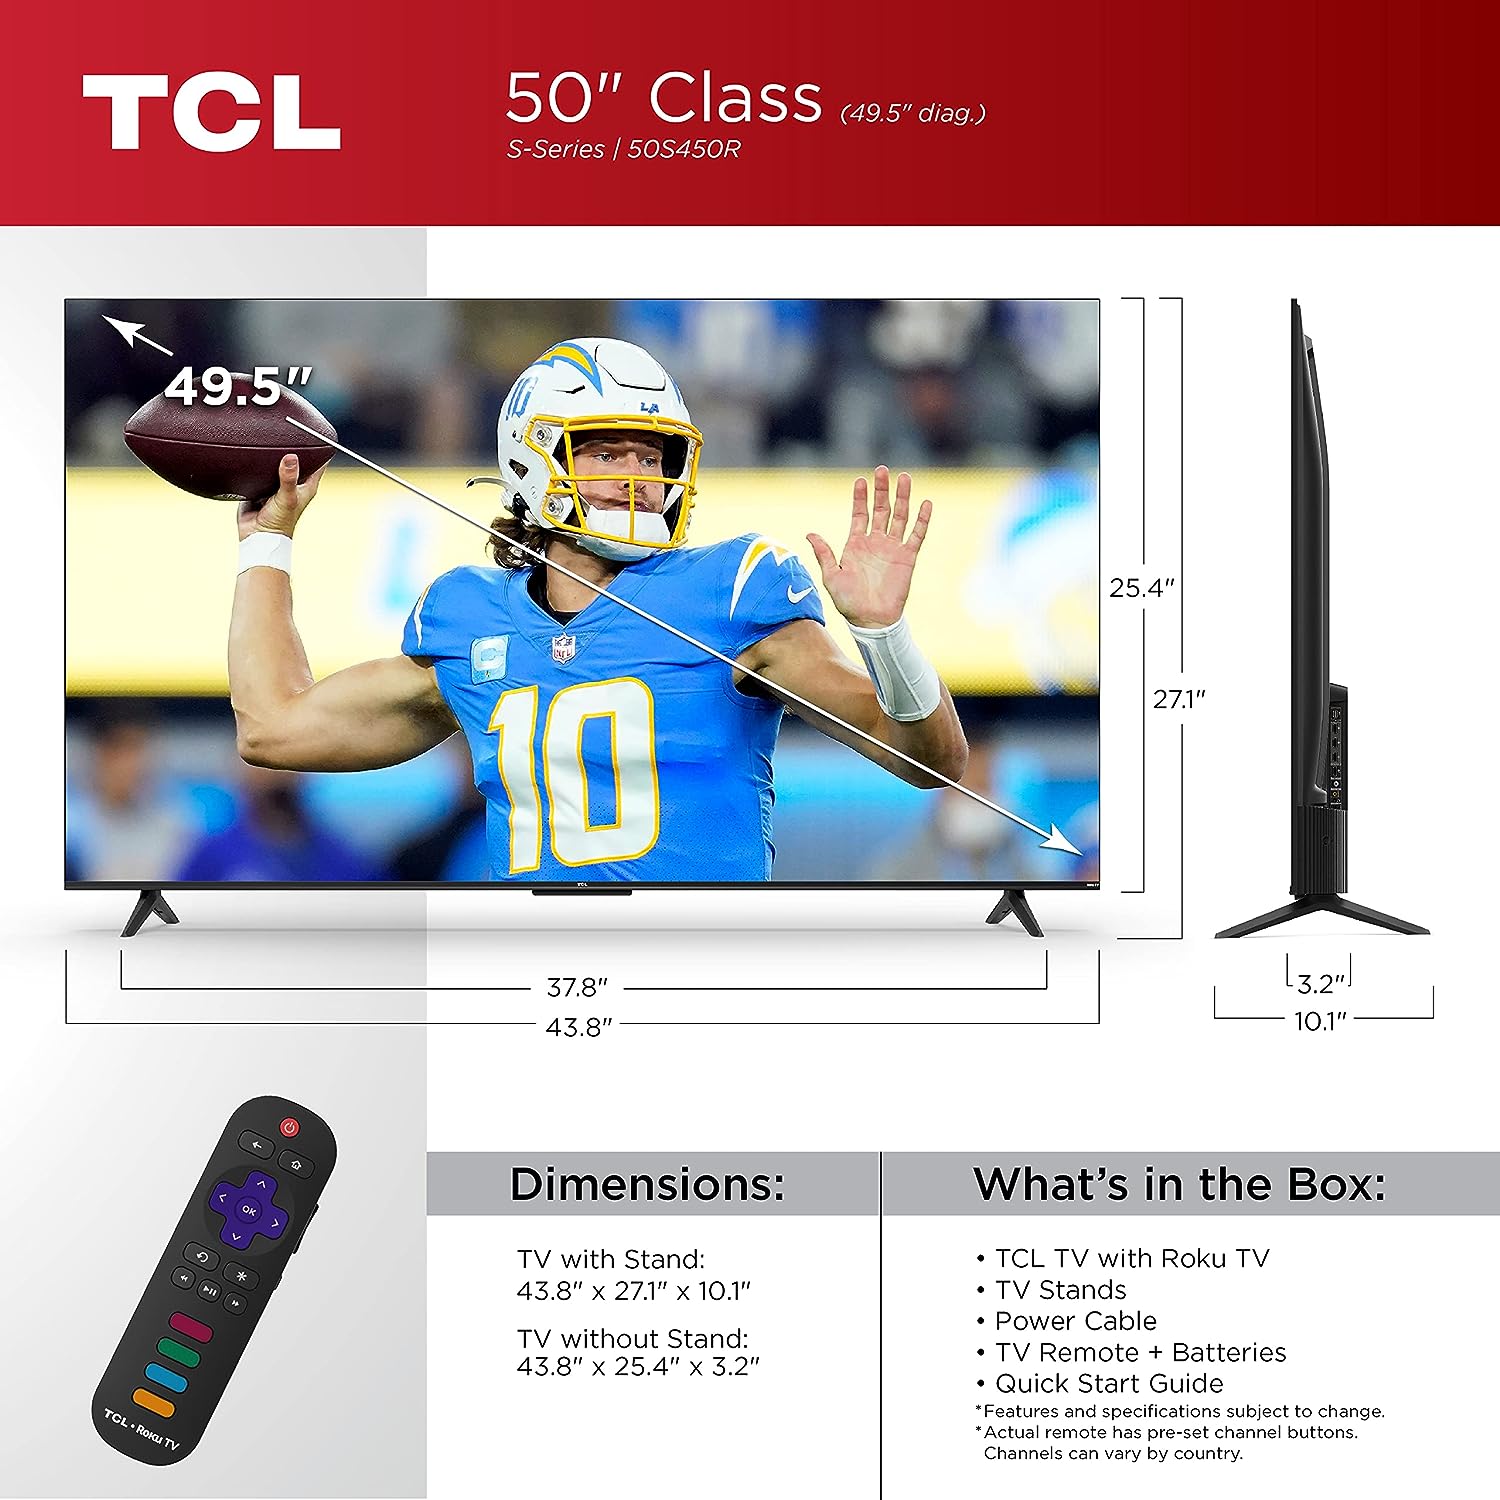 TCL 50-Inch Class S4 4K LED Smart TV Review